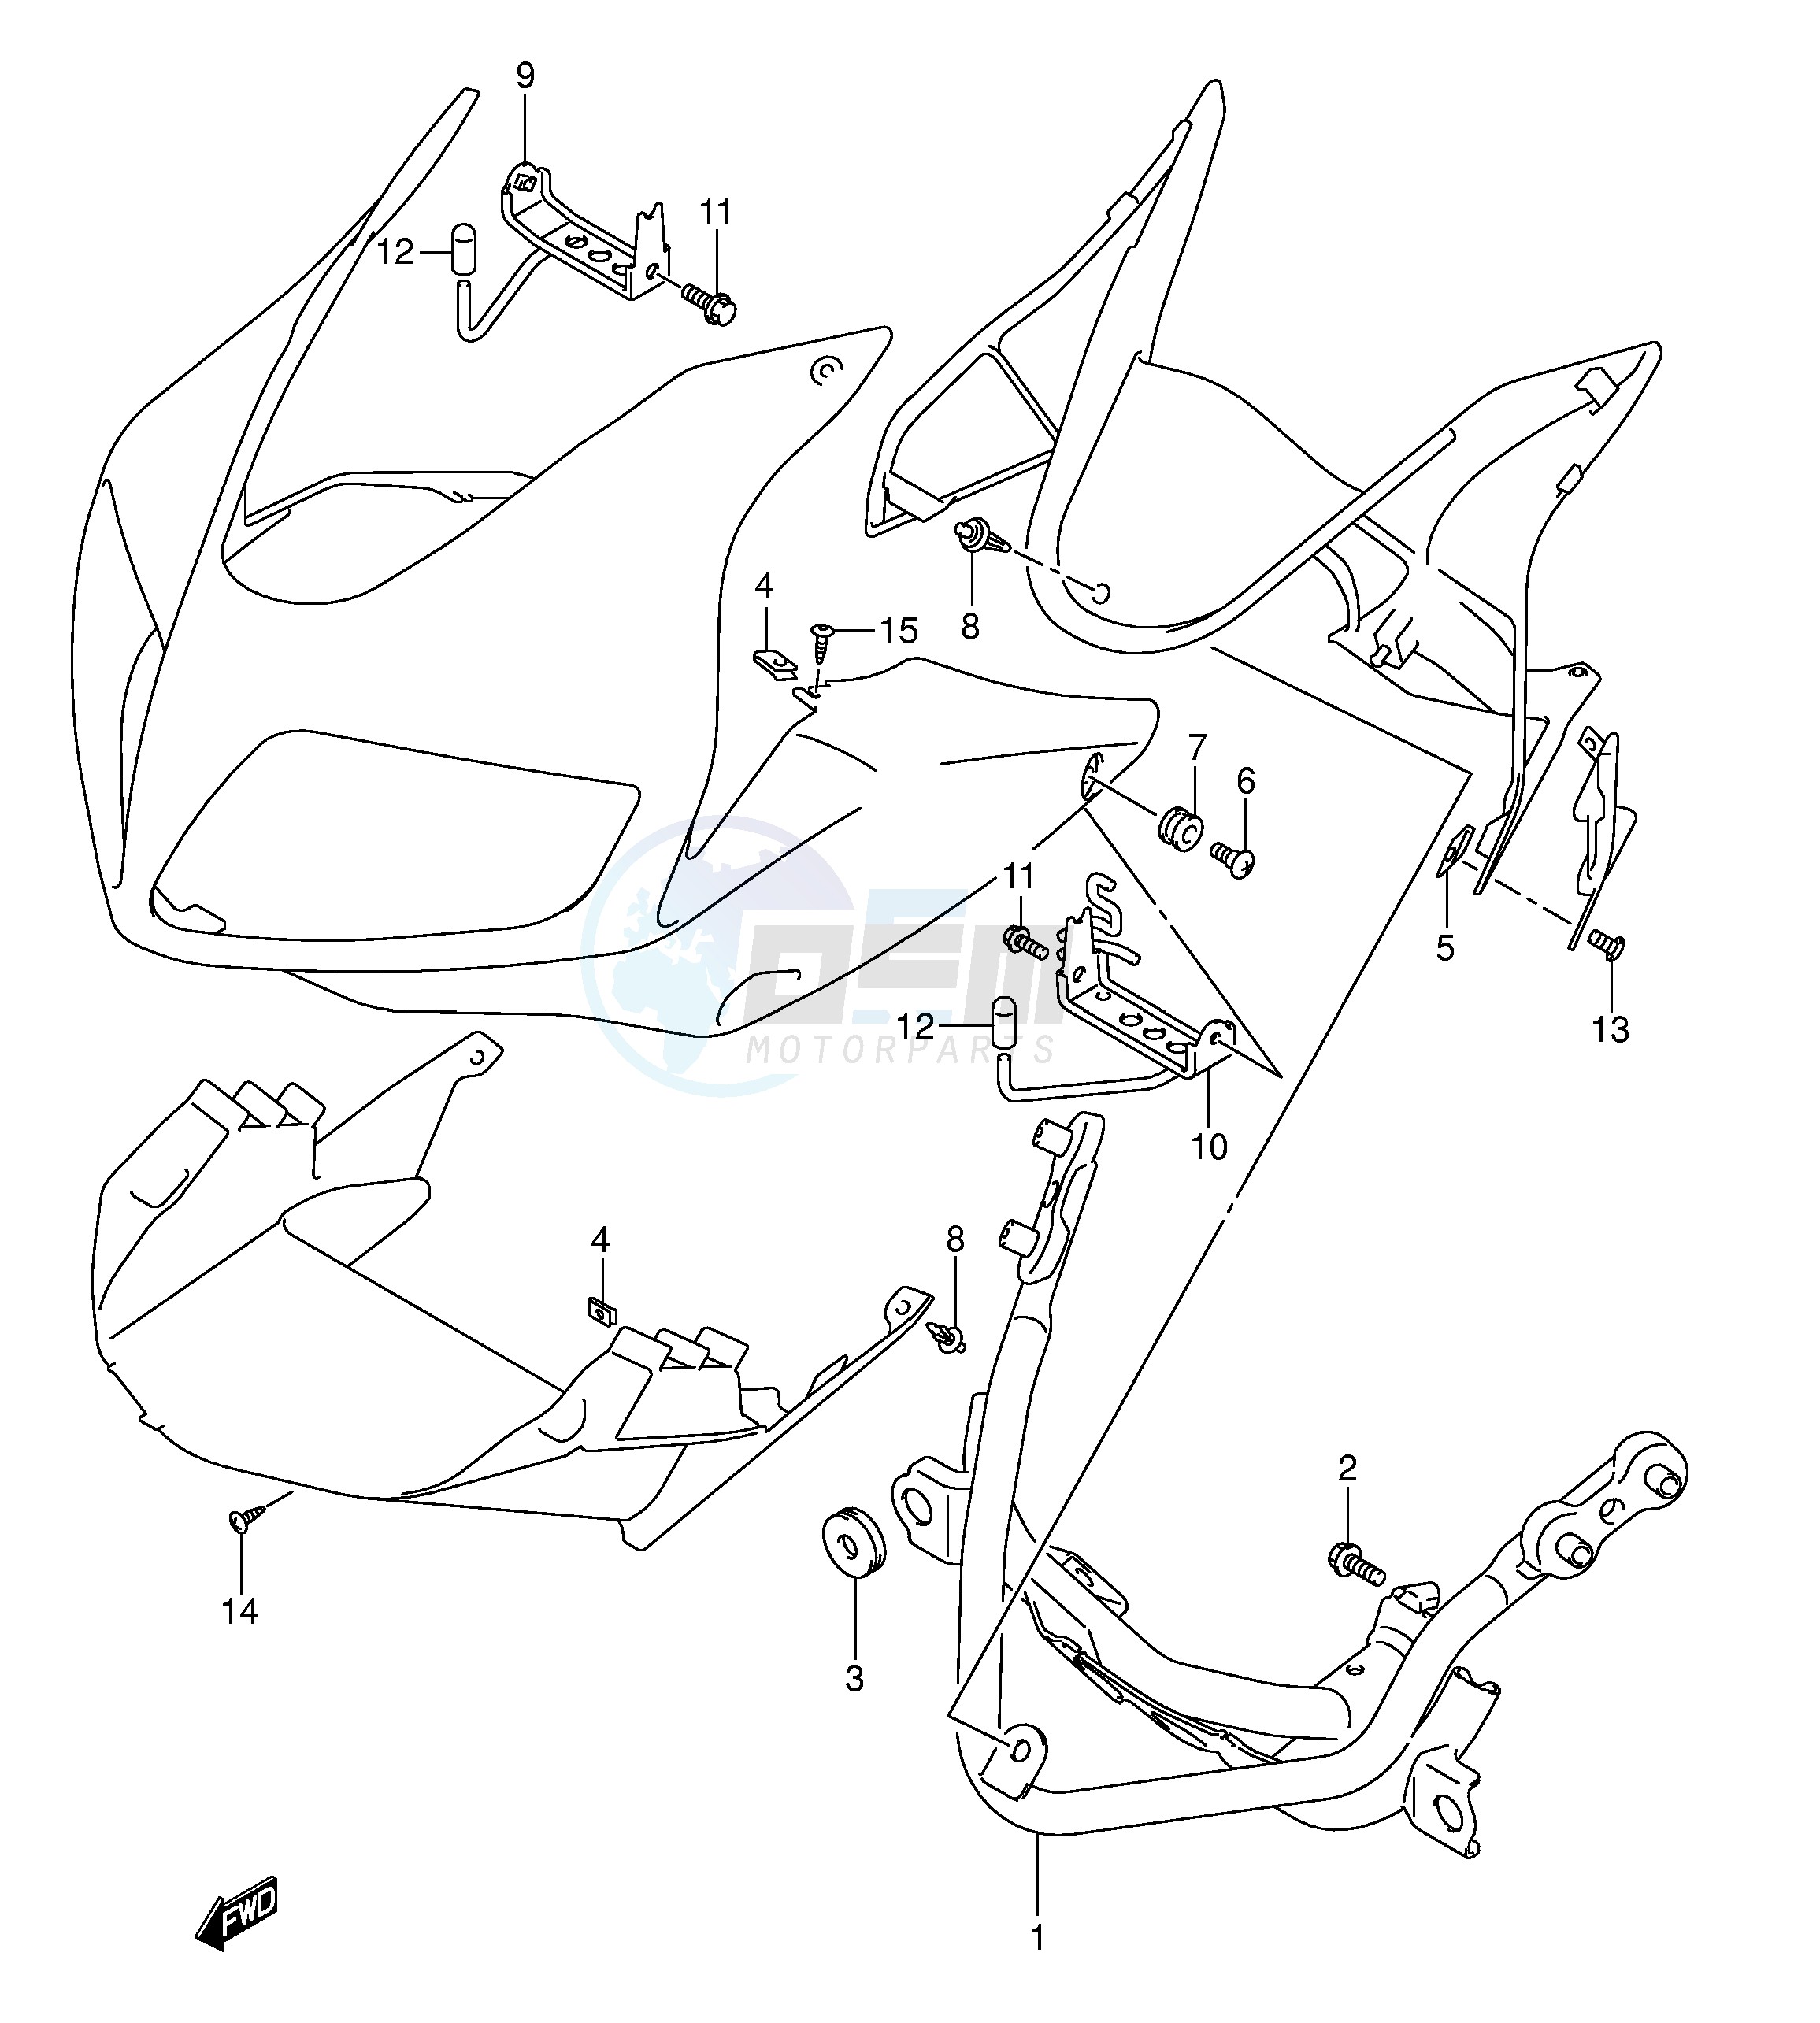 COWLING INSTALLATION PARTS (WITH COWLING) blueprint